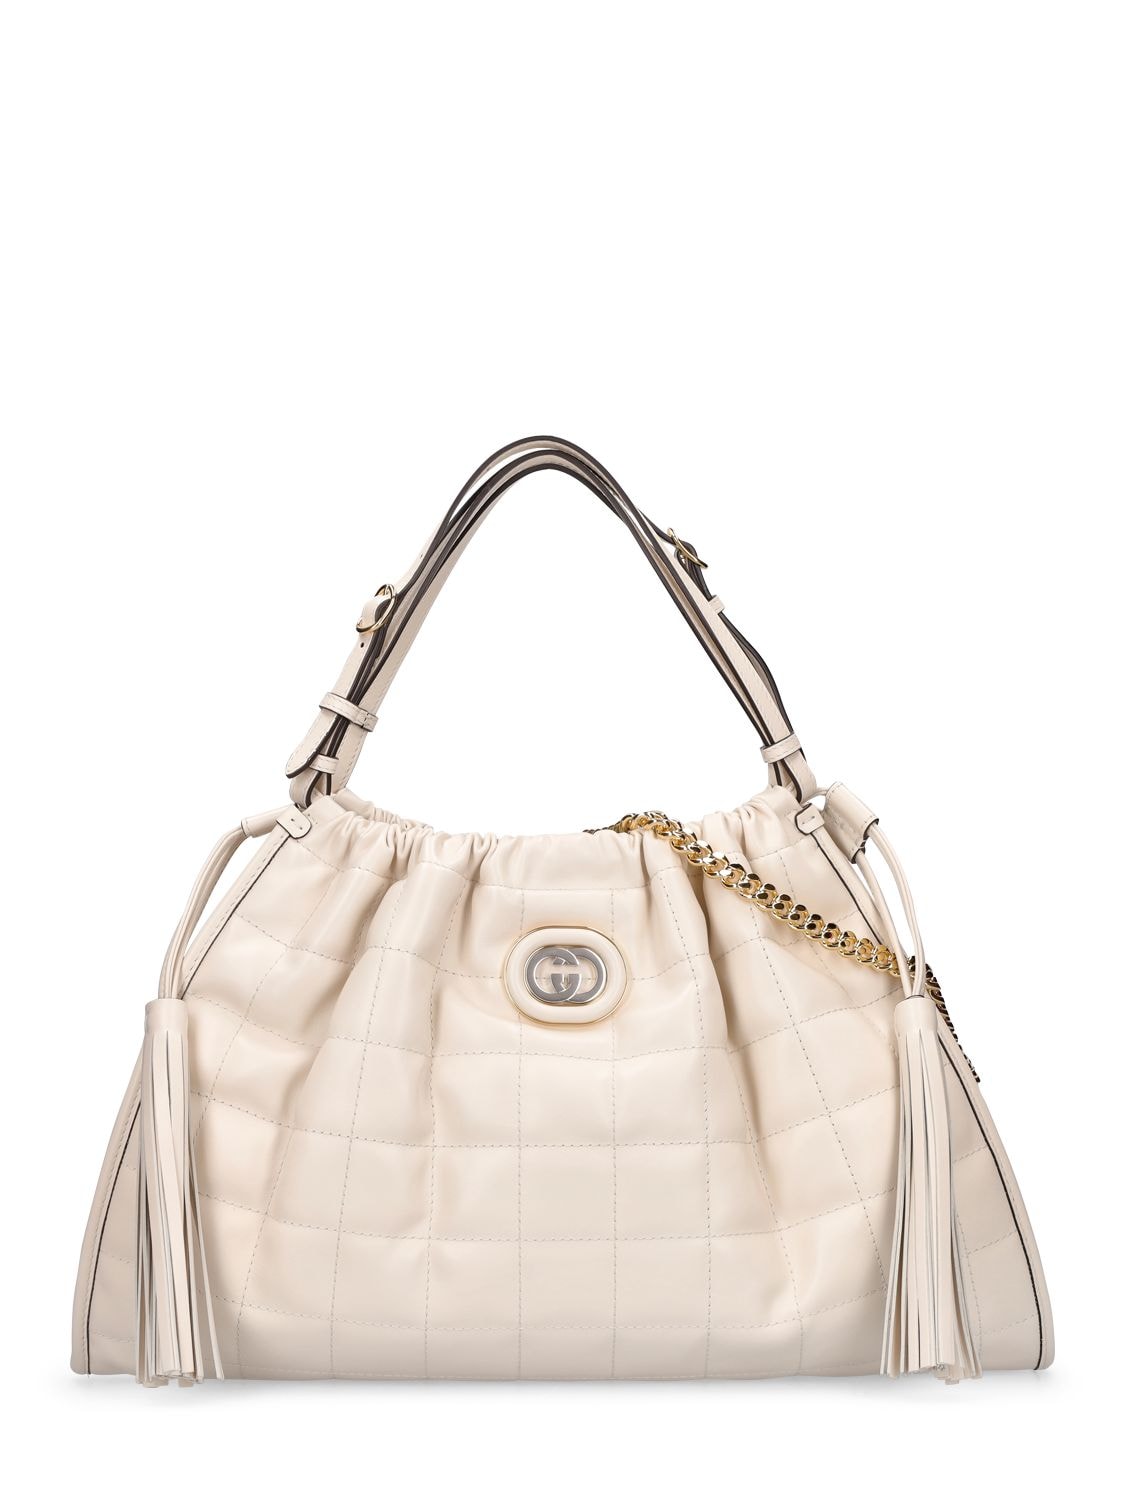 Gucci Deco Quilted Leather Tote Bag In Mystic White